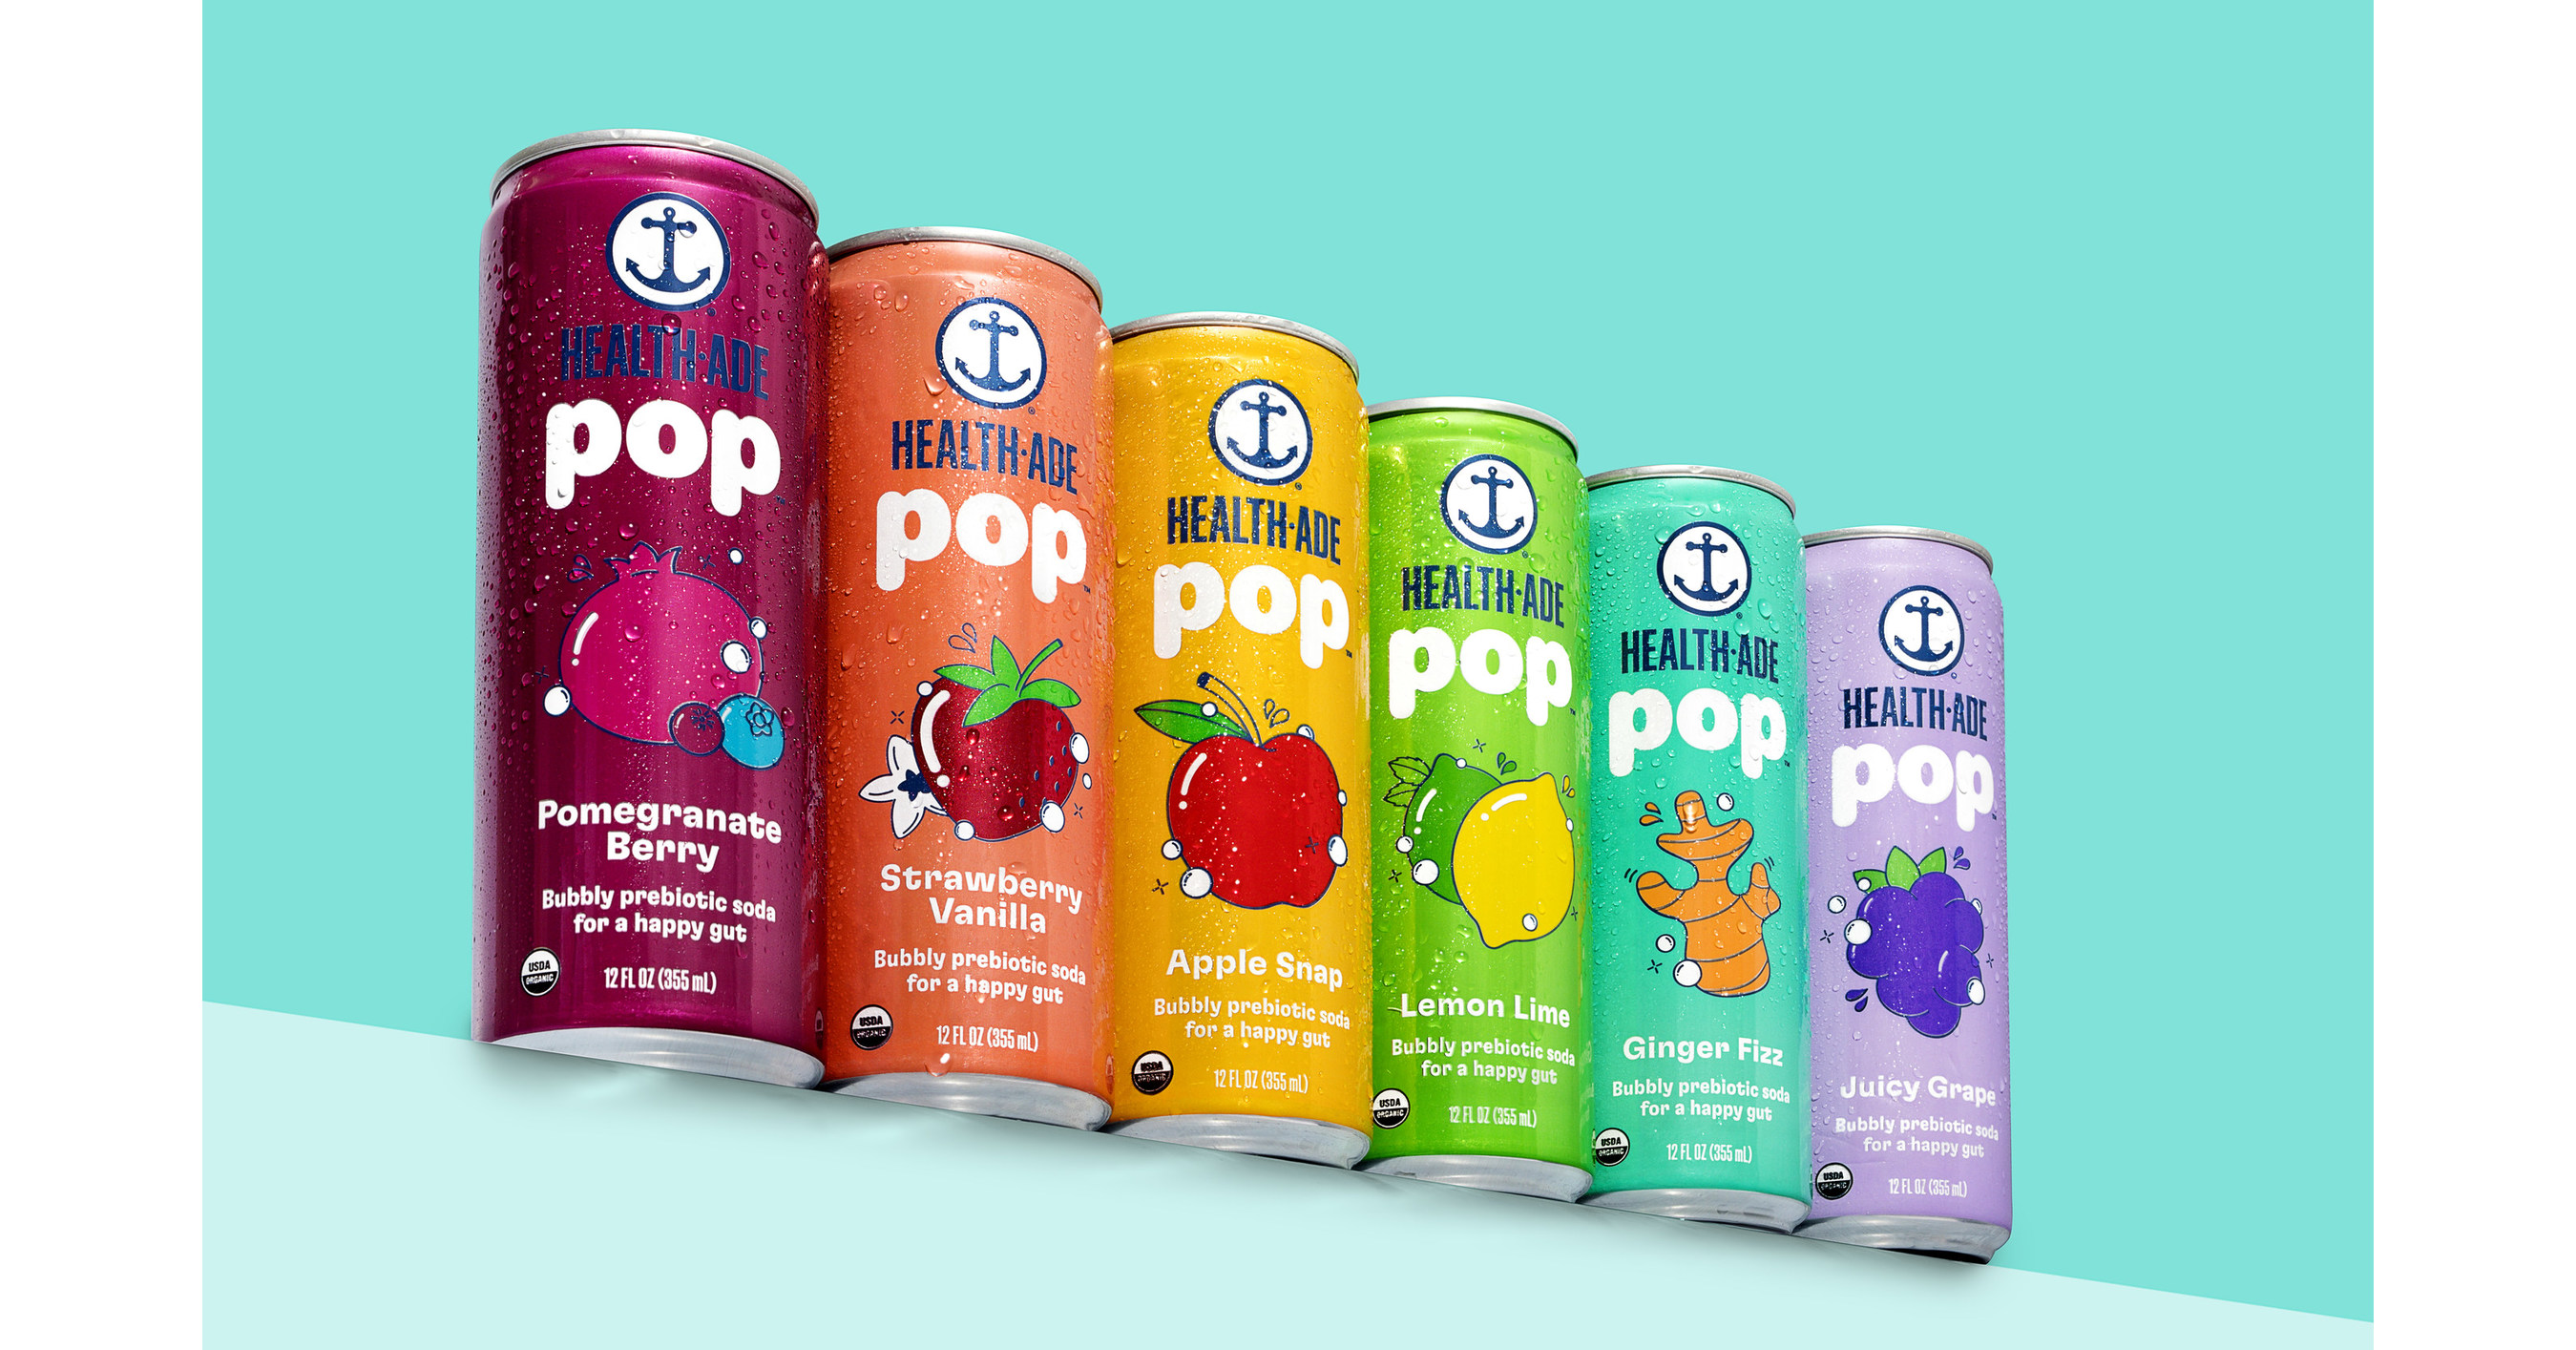 Health-Ade Launches Pop, Prebiotic Soda Line With Low Sugar And Real Gut Health Benefits, Rounding Out Gut Healthy Beverage Portfolio